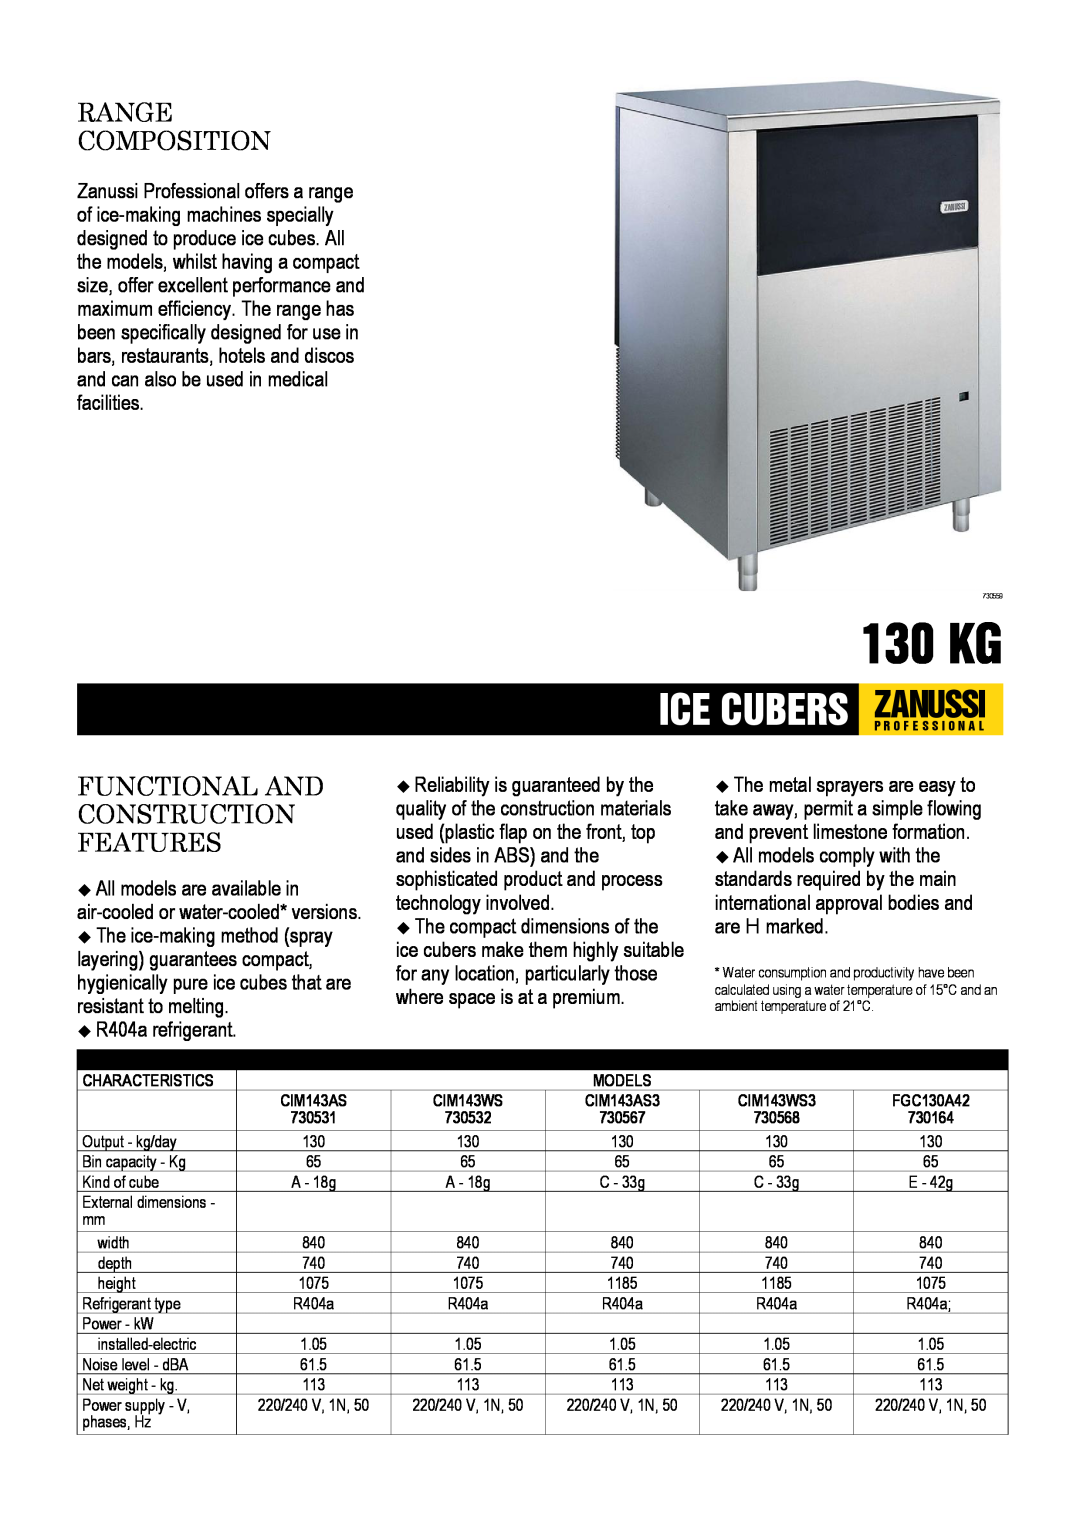 Zanussi FGC130A42, CIM143WS3, CIM143AS3, 730568 dimensions 130 KG, Range Composition, Functional And Construction Features 